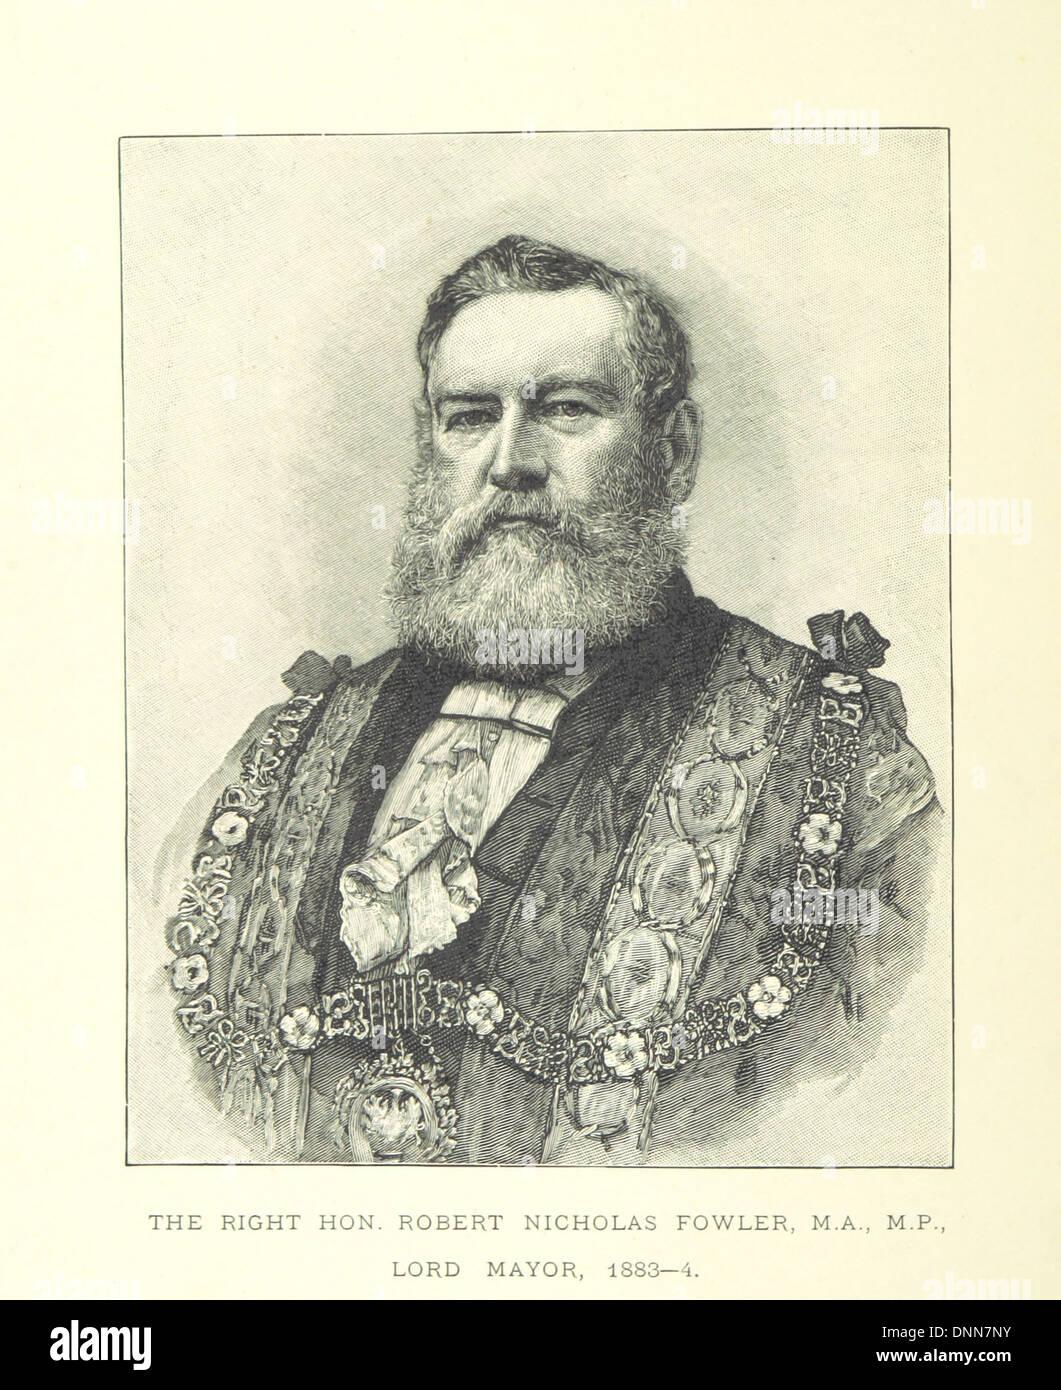 Image taken from page 20 of 'London's Roll of Fame: being complimentary notes and addresses from the City of London, on presentation of the honorary freedom of that city, and on other occasions. From ... A.D. 1757 to 1884 ... Extracted mainly from the rec Stock Photo